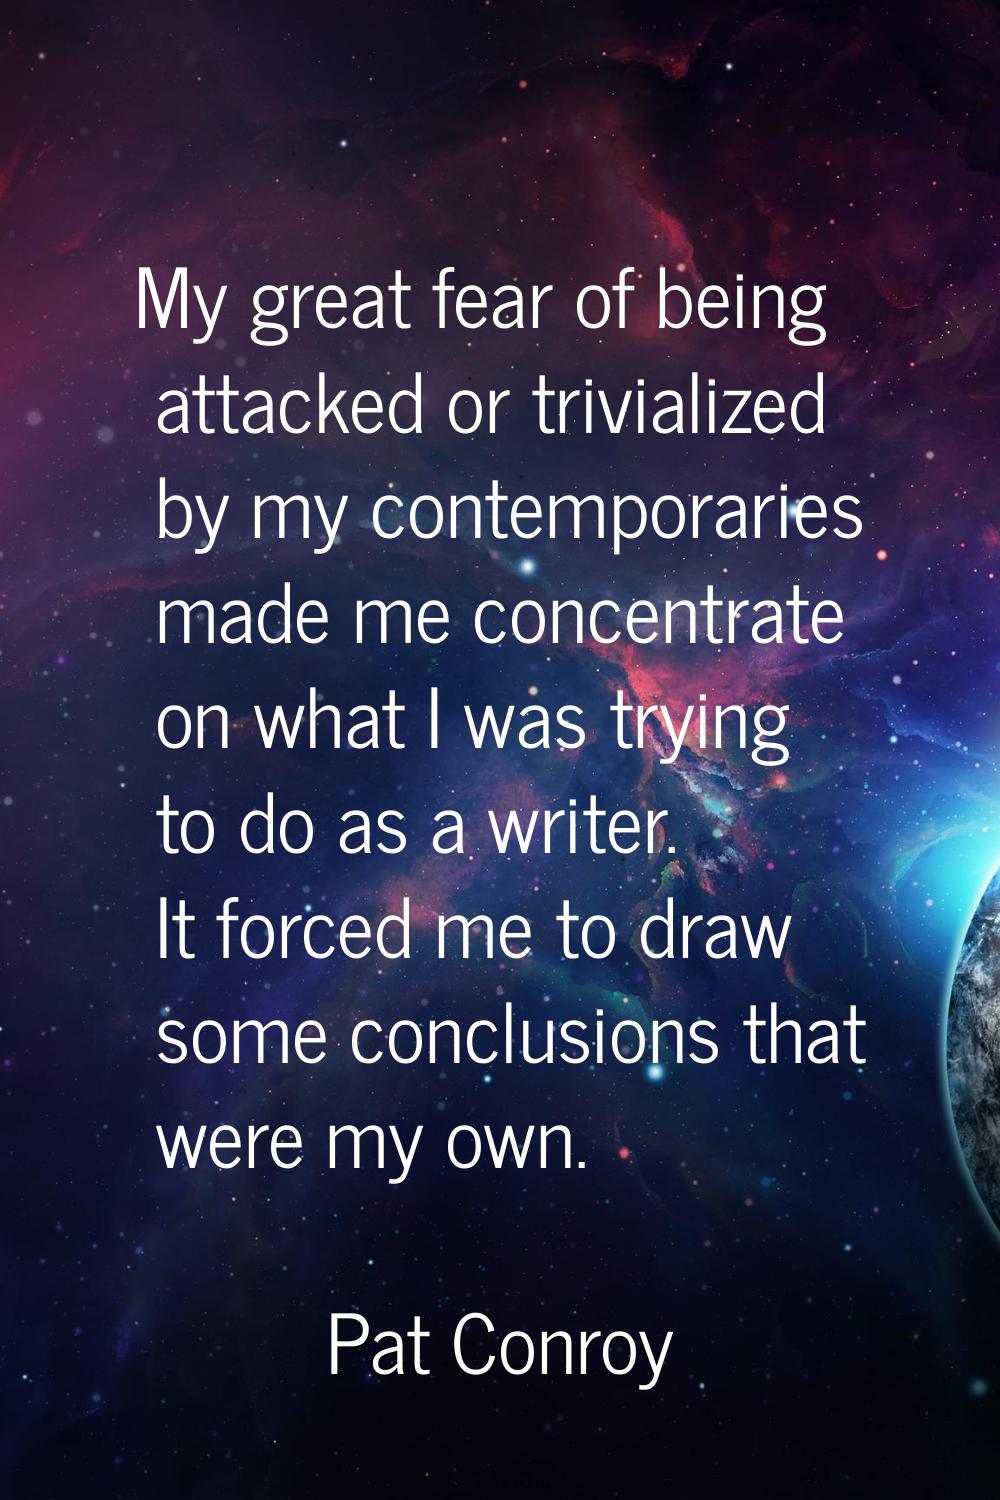 My great fear of being attacked or trivialized by my contemporaries made me concentrate on what I w